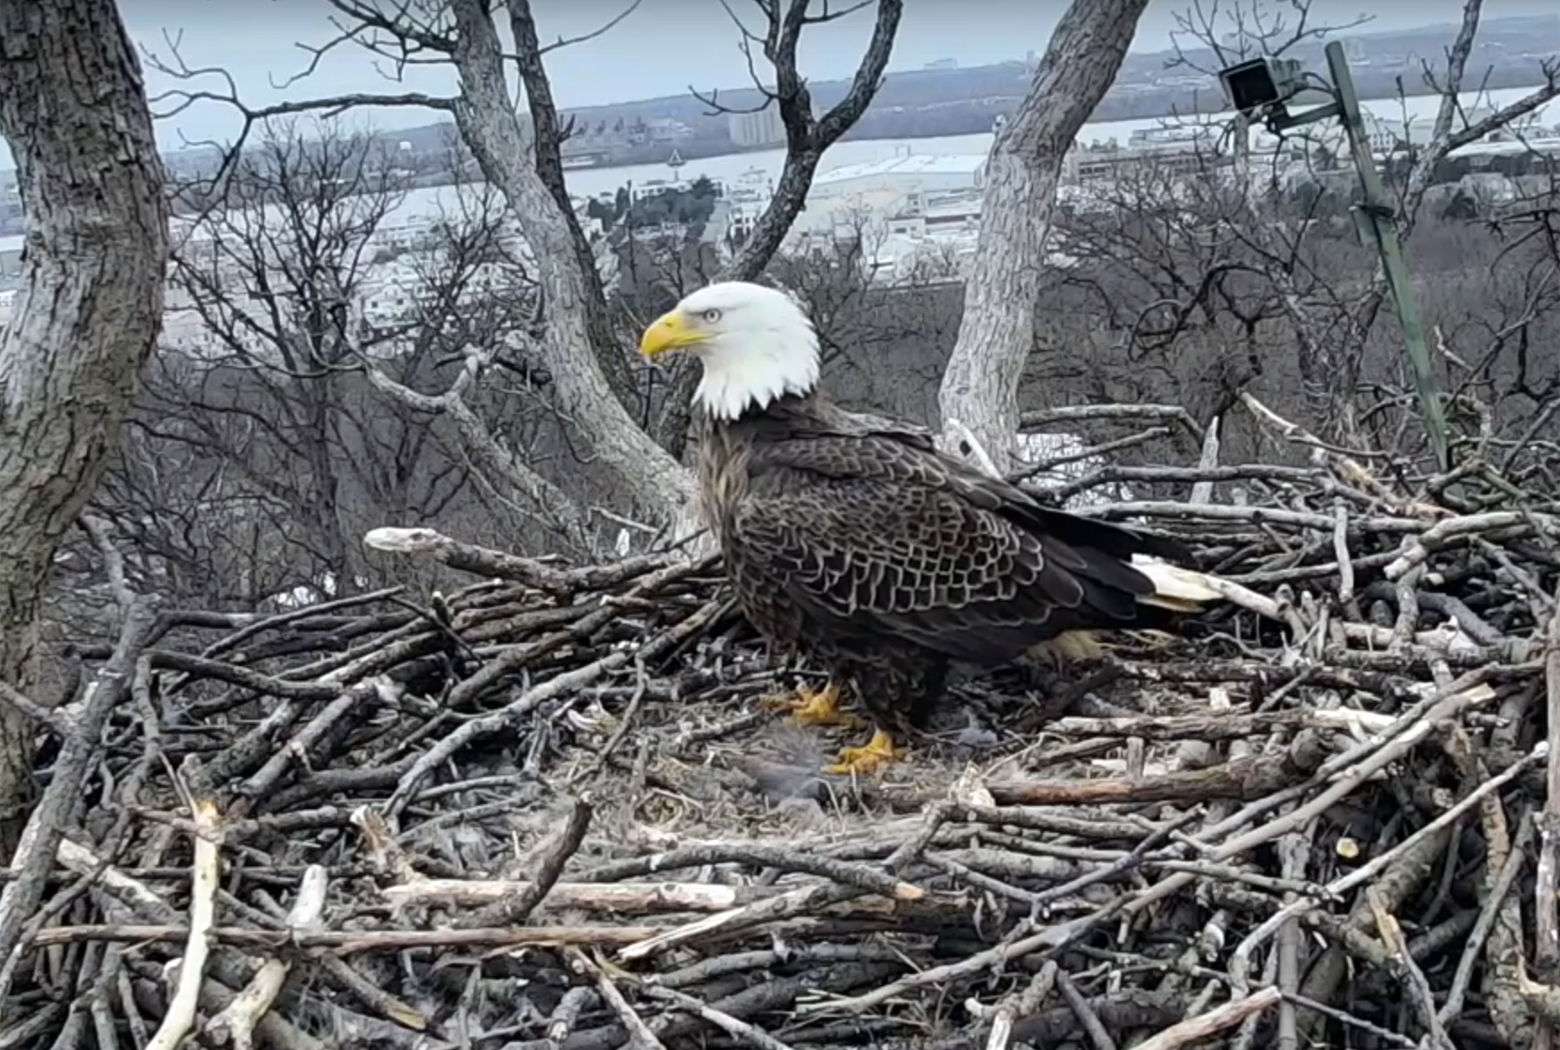 Justice, the missing male bald eagle from the Earth Conservation Corps Eagle Cam, has returned. (Courtesy Earth Conservation Corps)